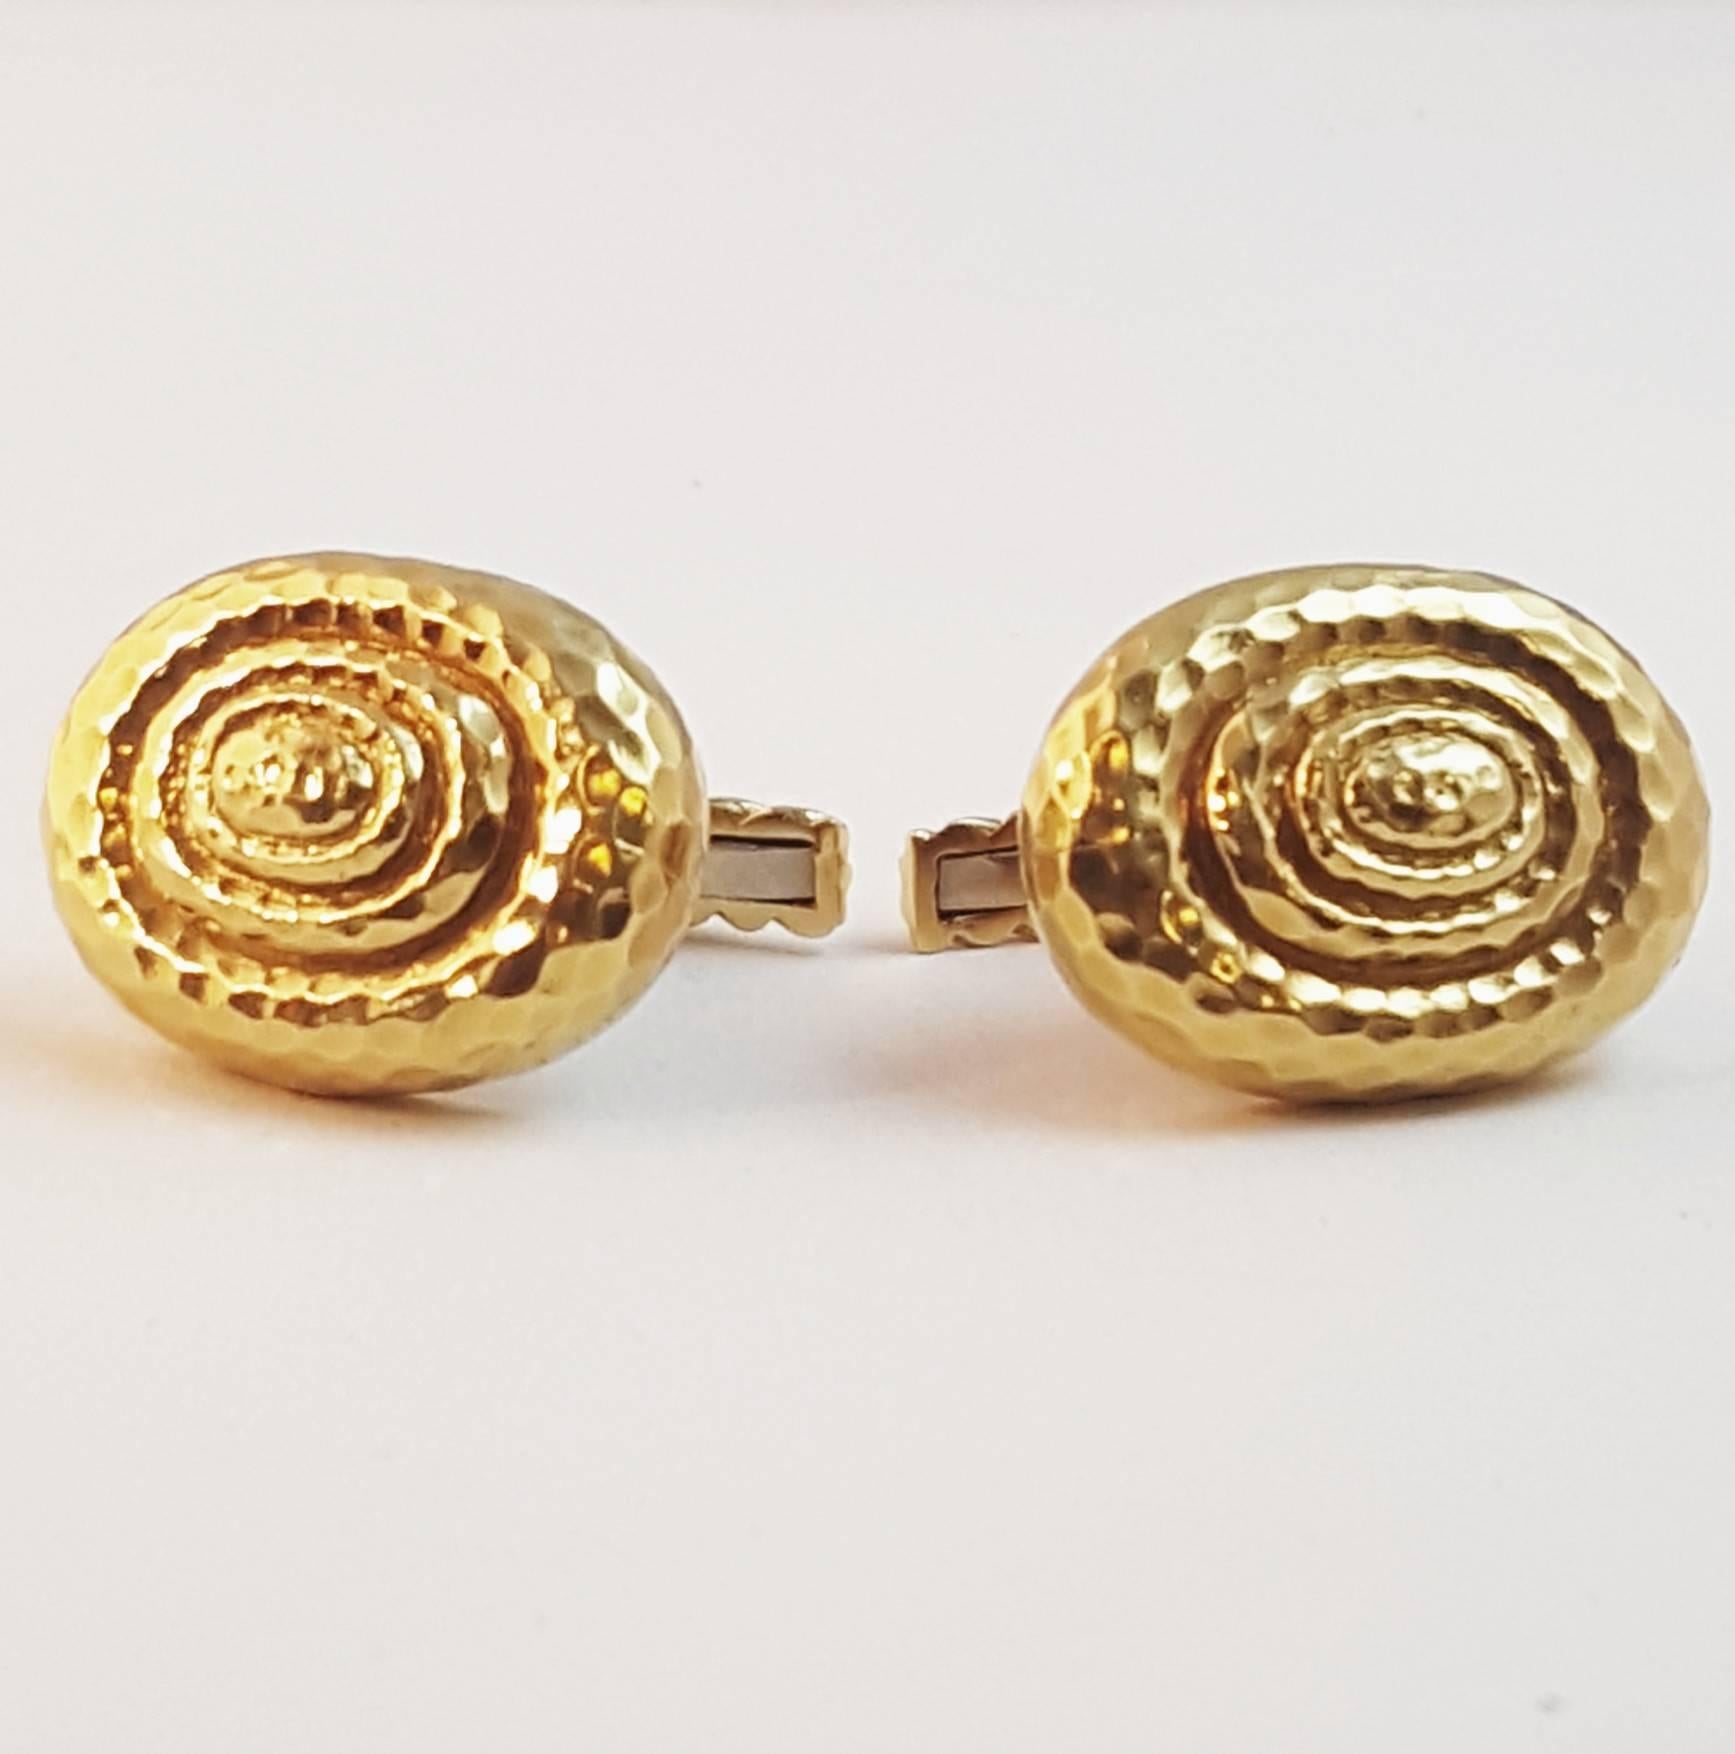 Nothing completes an elegant person's outfit like cufflinks for a put together and finished look.  And nothing compares to cufflinks by the iconic designs of David Webb.  Highly collectible and equally suited to ladies or gentlemen.  These gorgeous